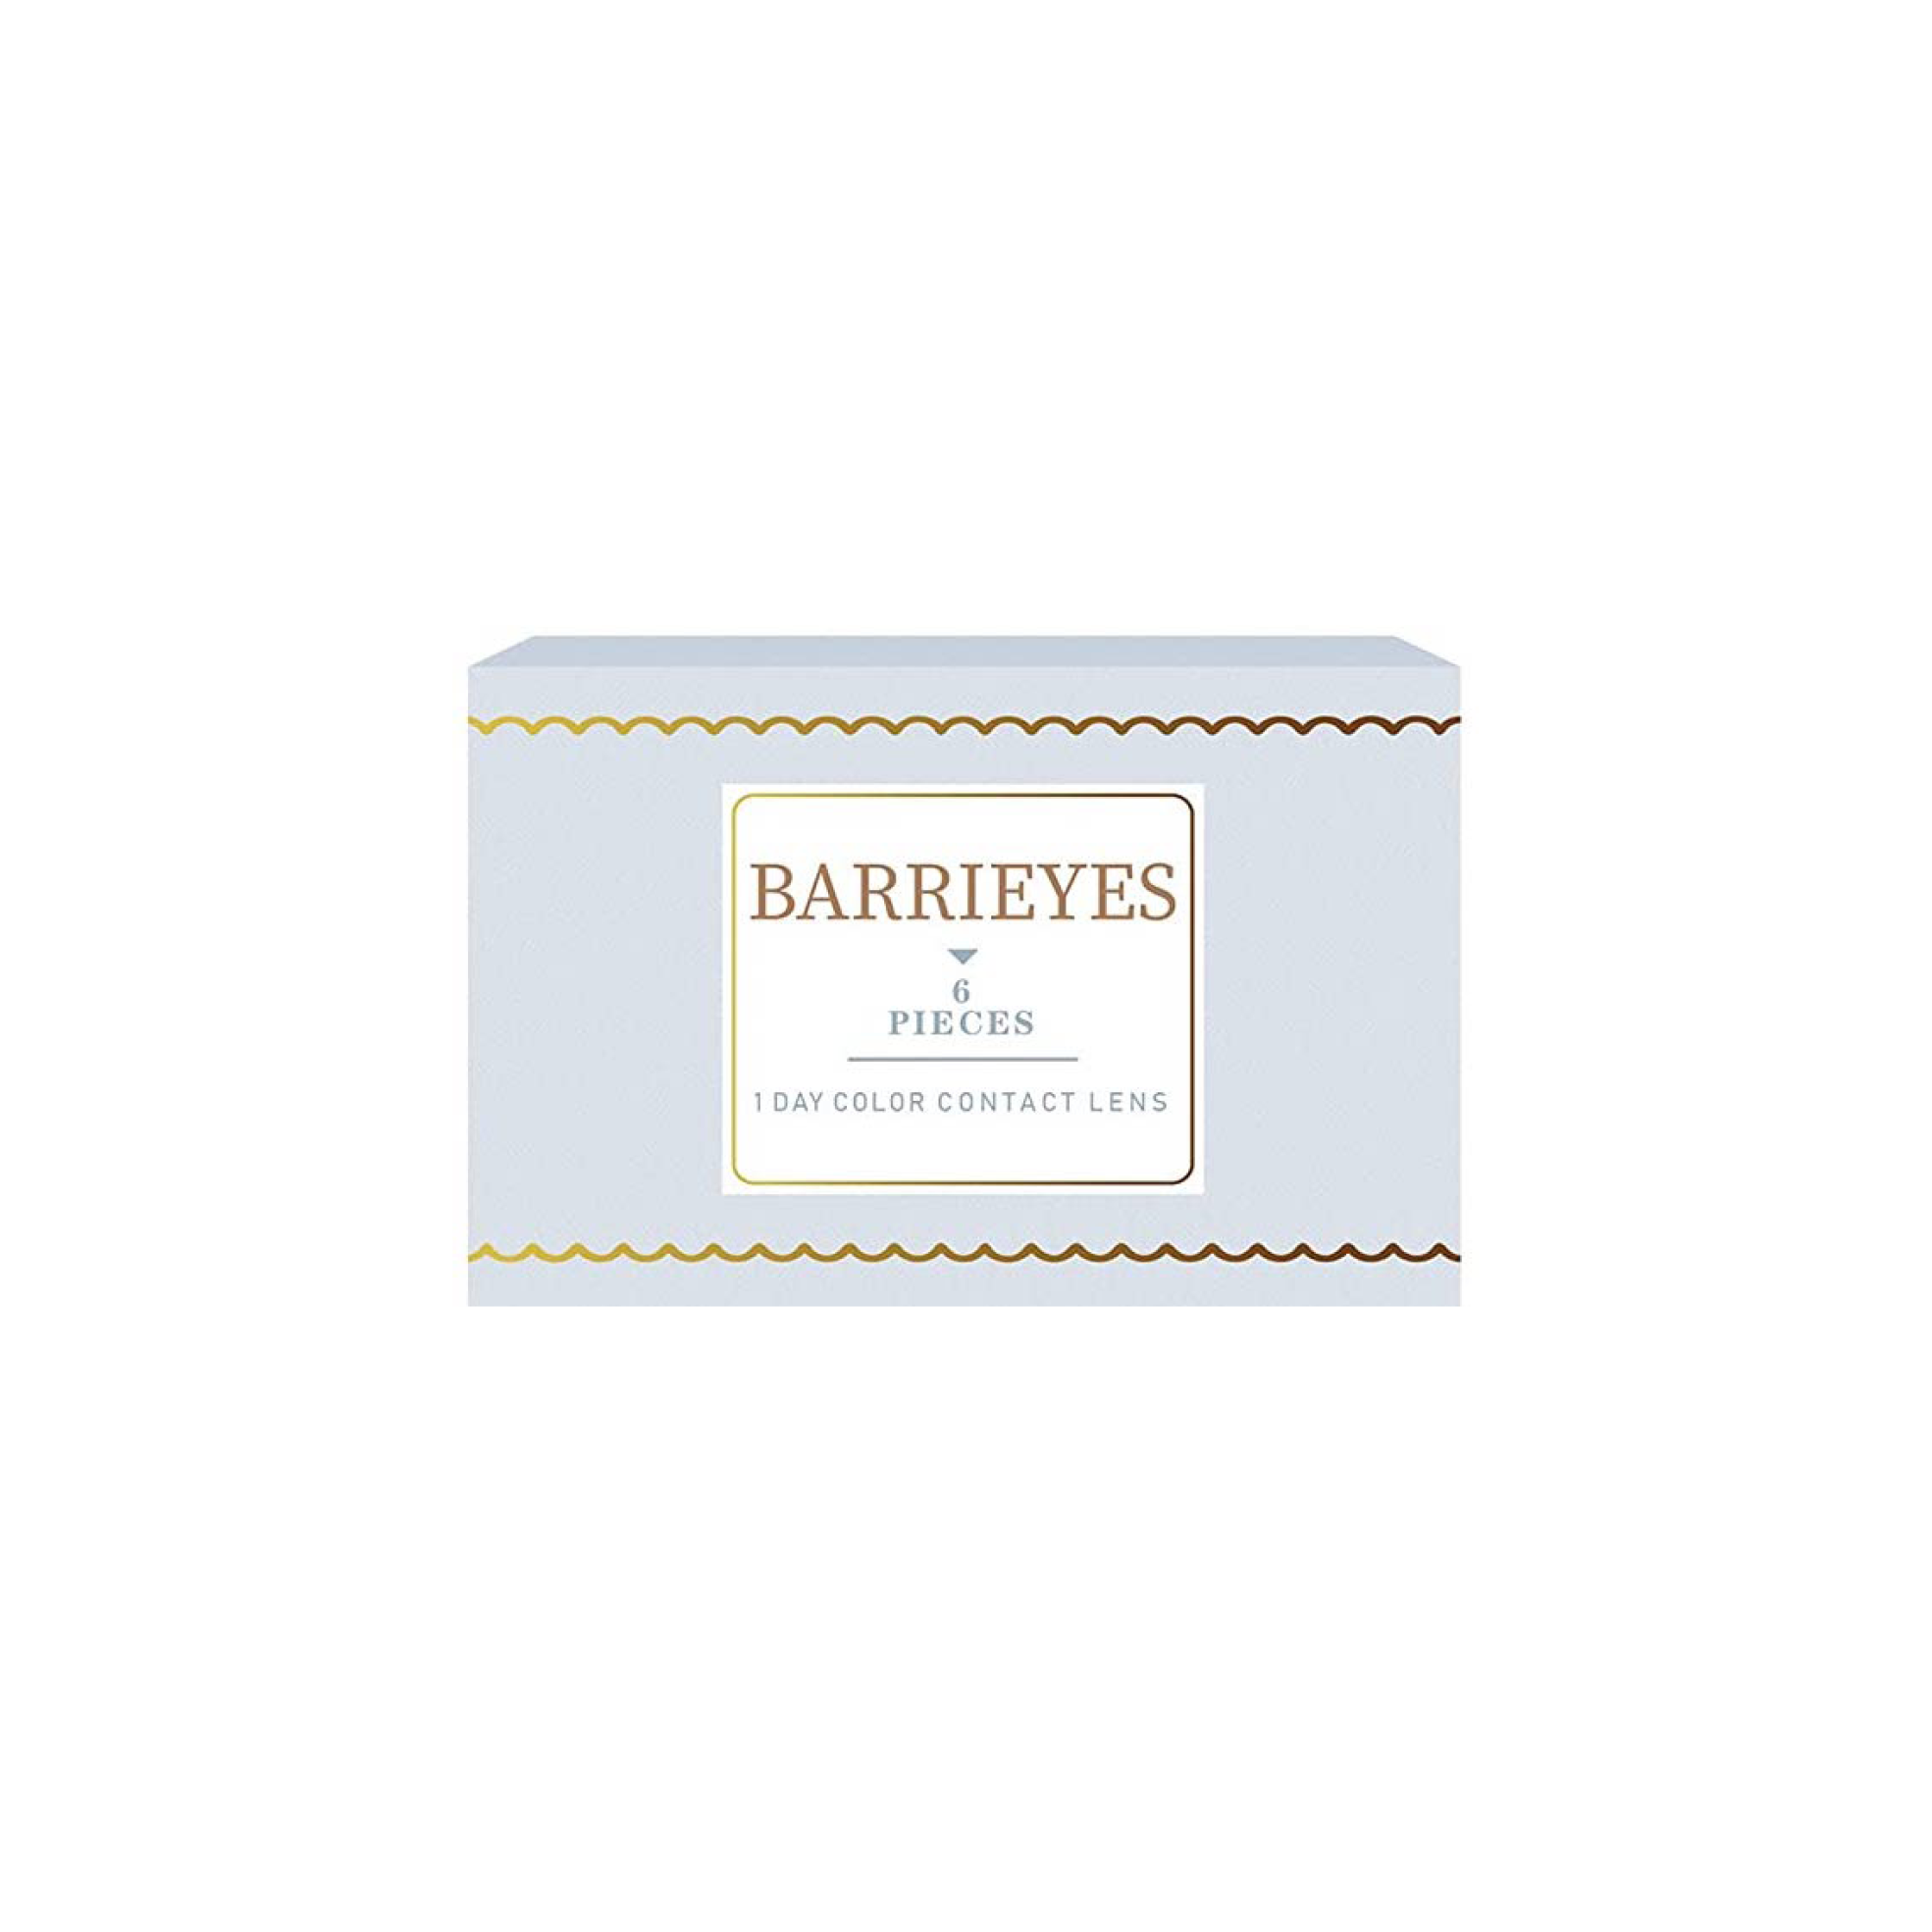 Barrieyes 1-Day color contact lens #Summer mint日抛美瞳夏薄荷｜6 Pcs